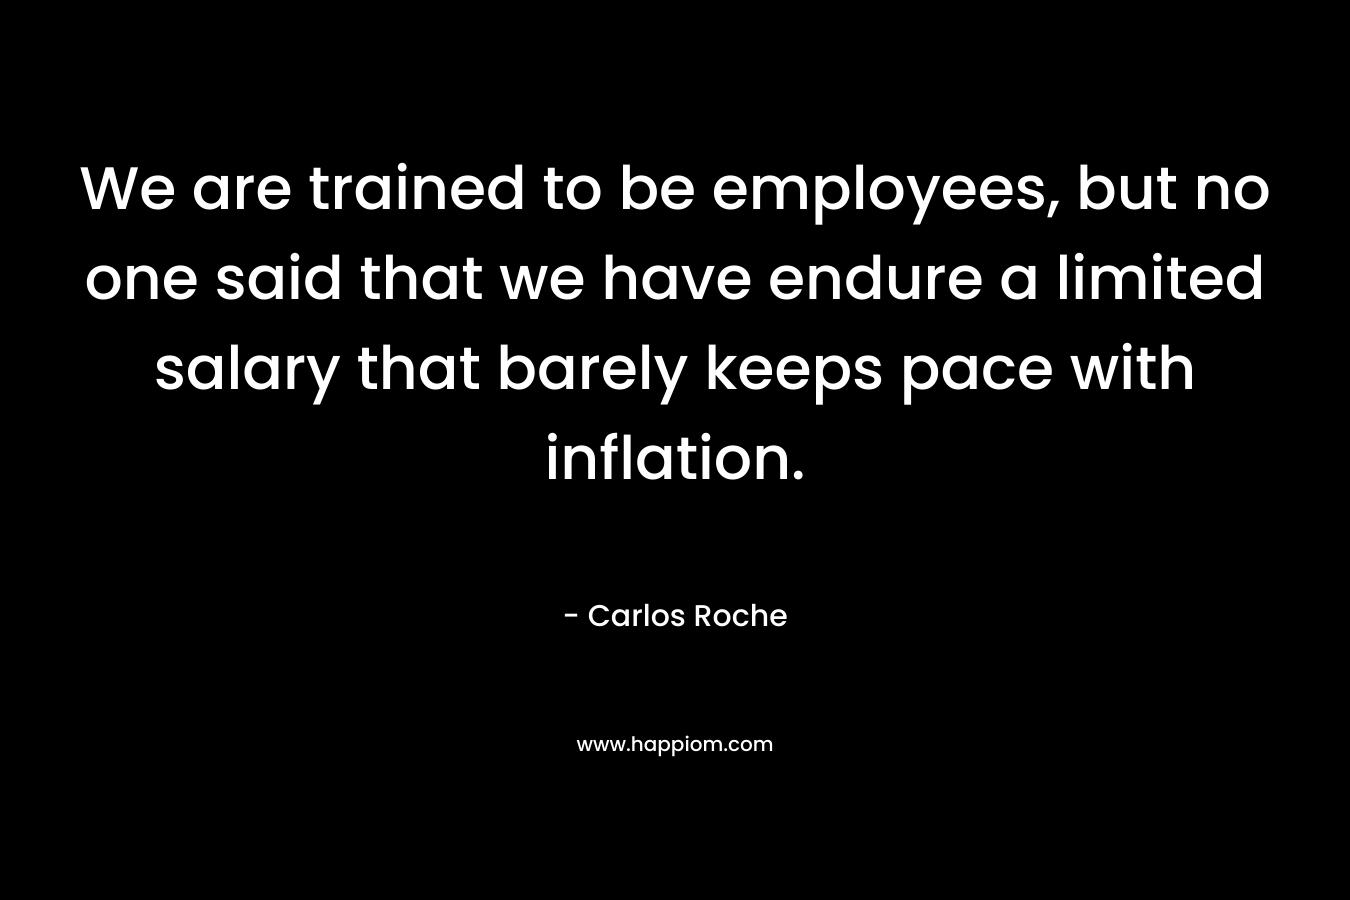 We are trained to be employees, but no one said that we have endure a limited salary that barely keeps pace with inflation. – Carlos Roche